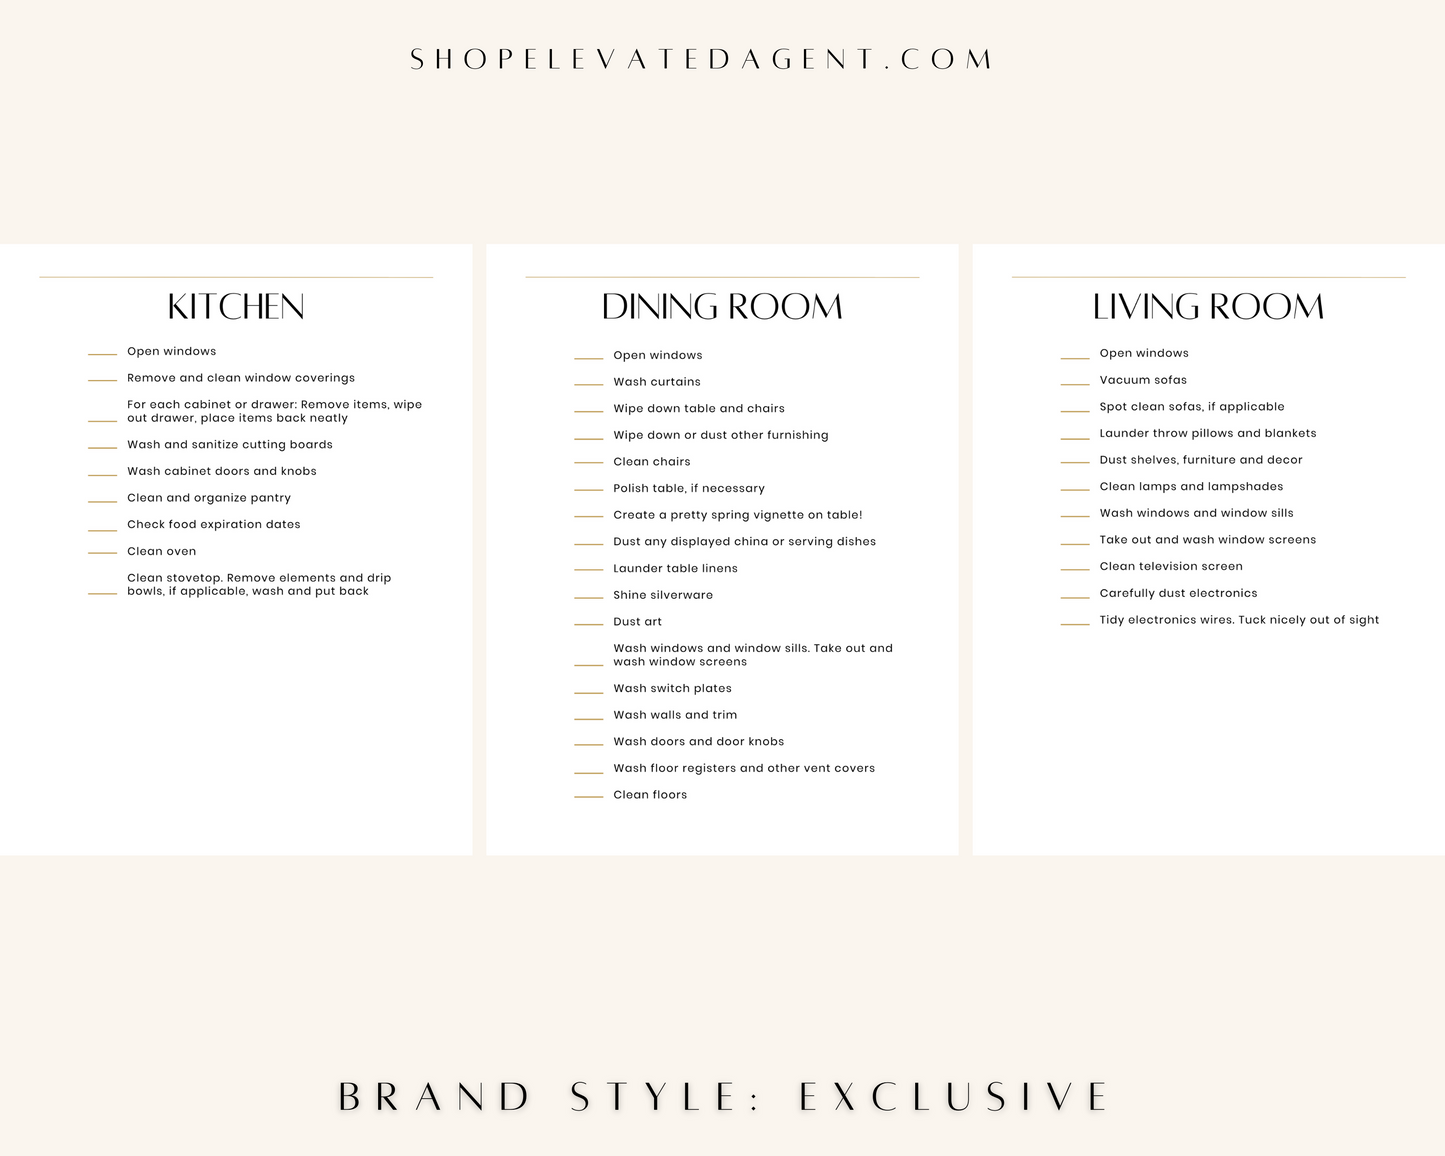 Cleaning Checklist - Exclusive Brand Style